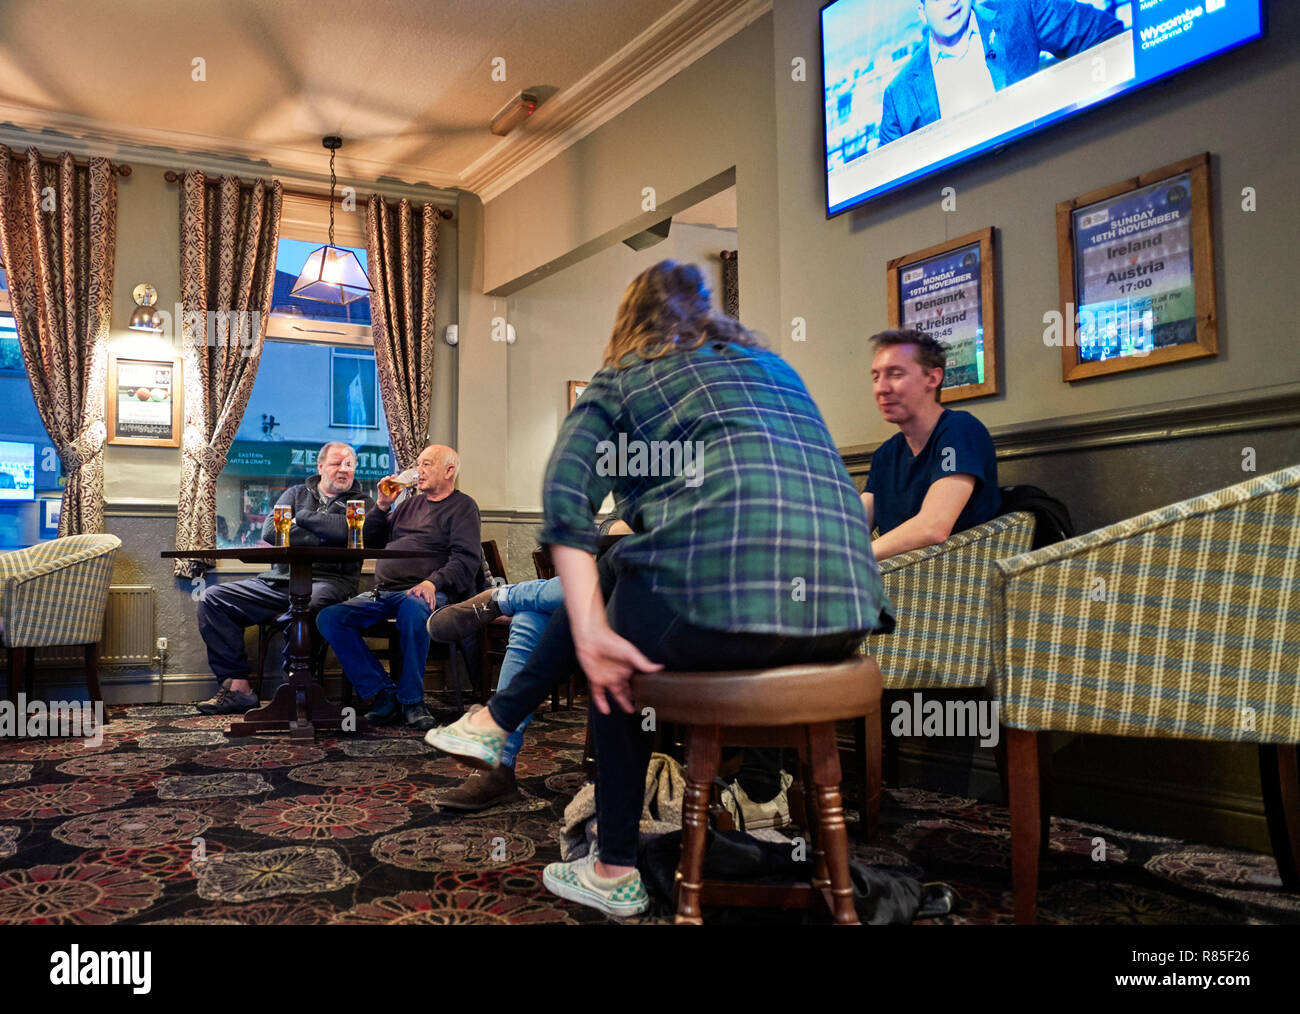 Watching sport on a Saturday afternoon in a pub with TV screens and patterned carpet Stock Photo